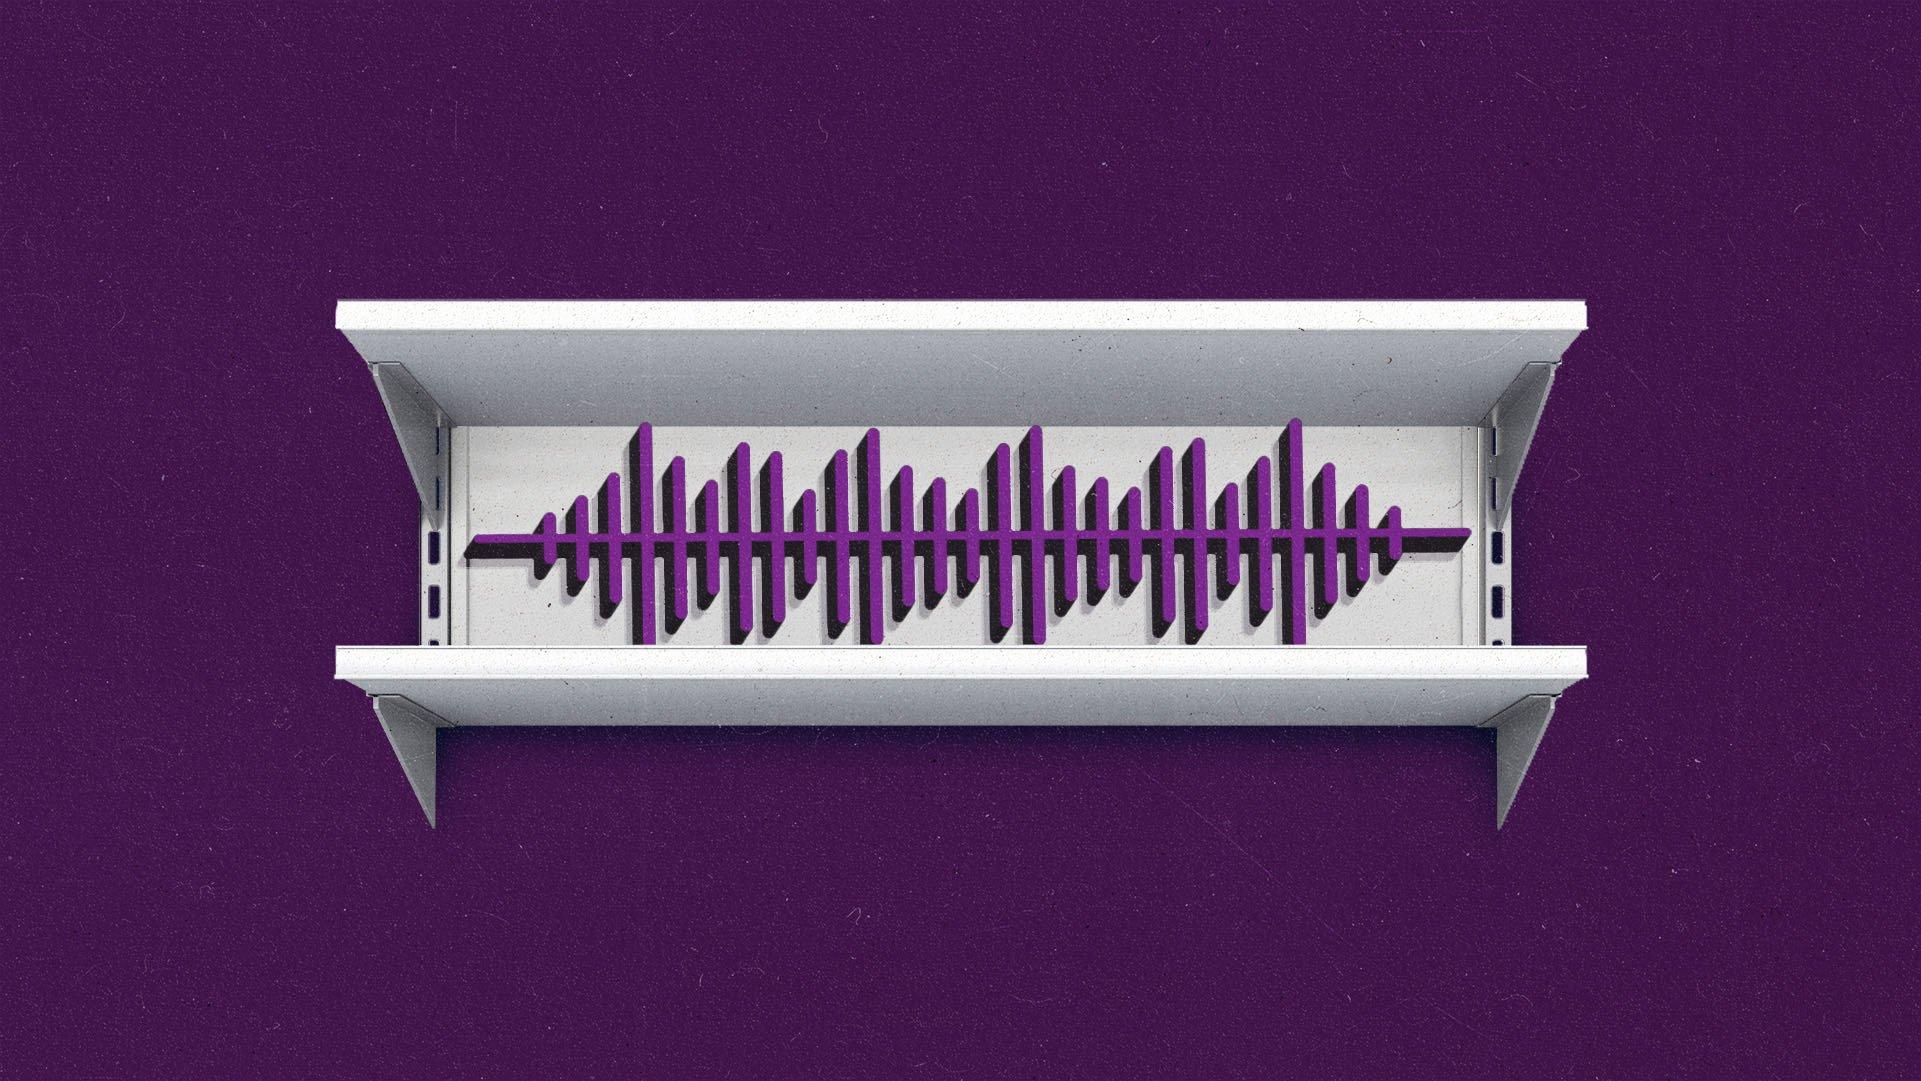 Gray grocery store shelf with a dark purple audio wave symbol on it, with a dark purple background